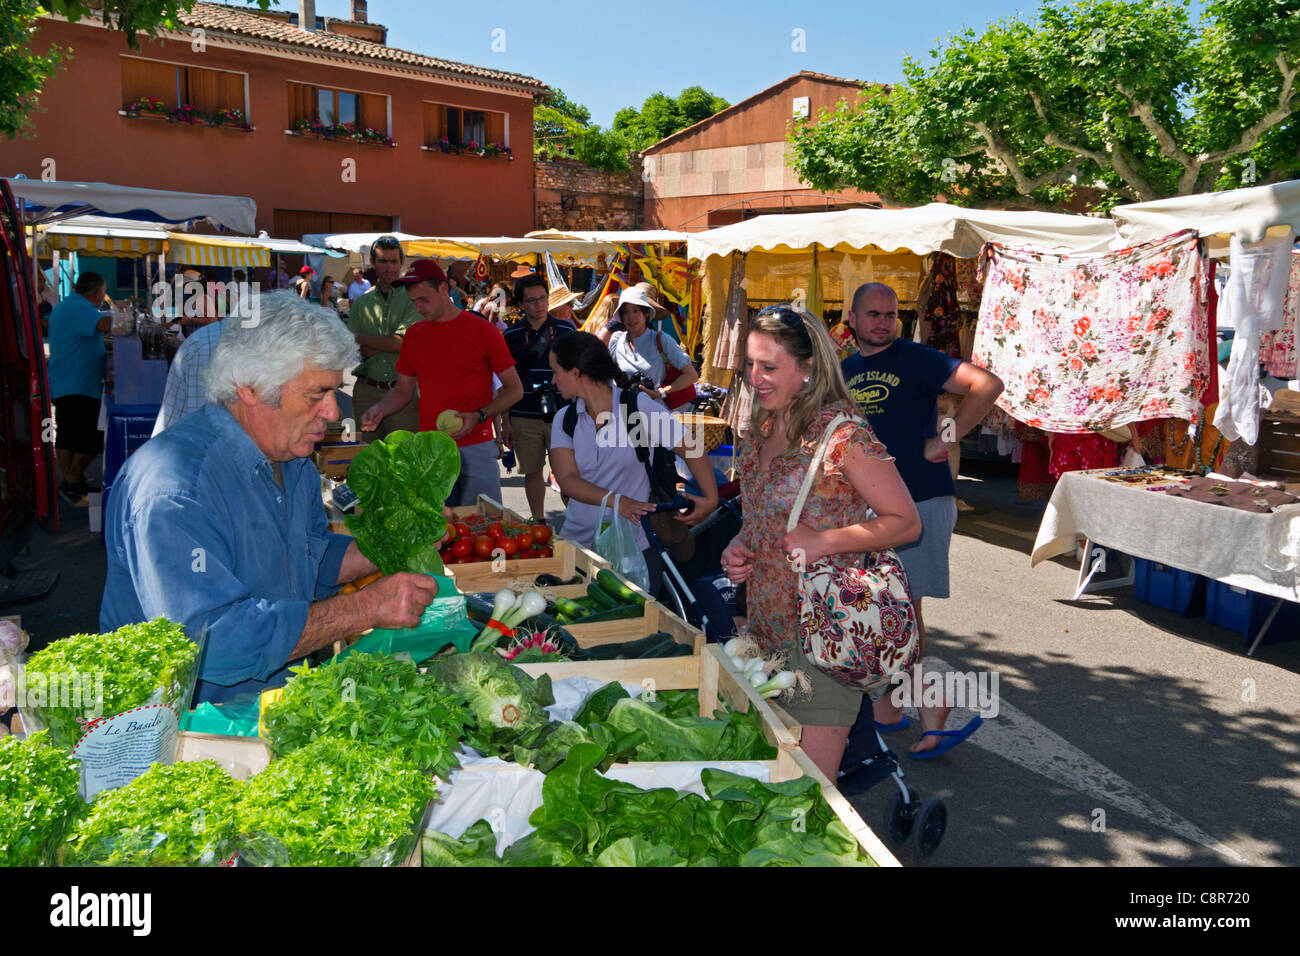 Market in Roussilion, Vaucluse, Provence, South France Stock Photo